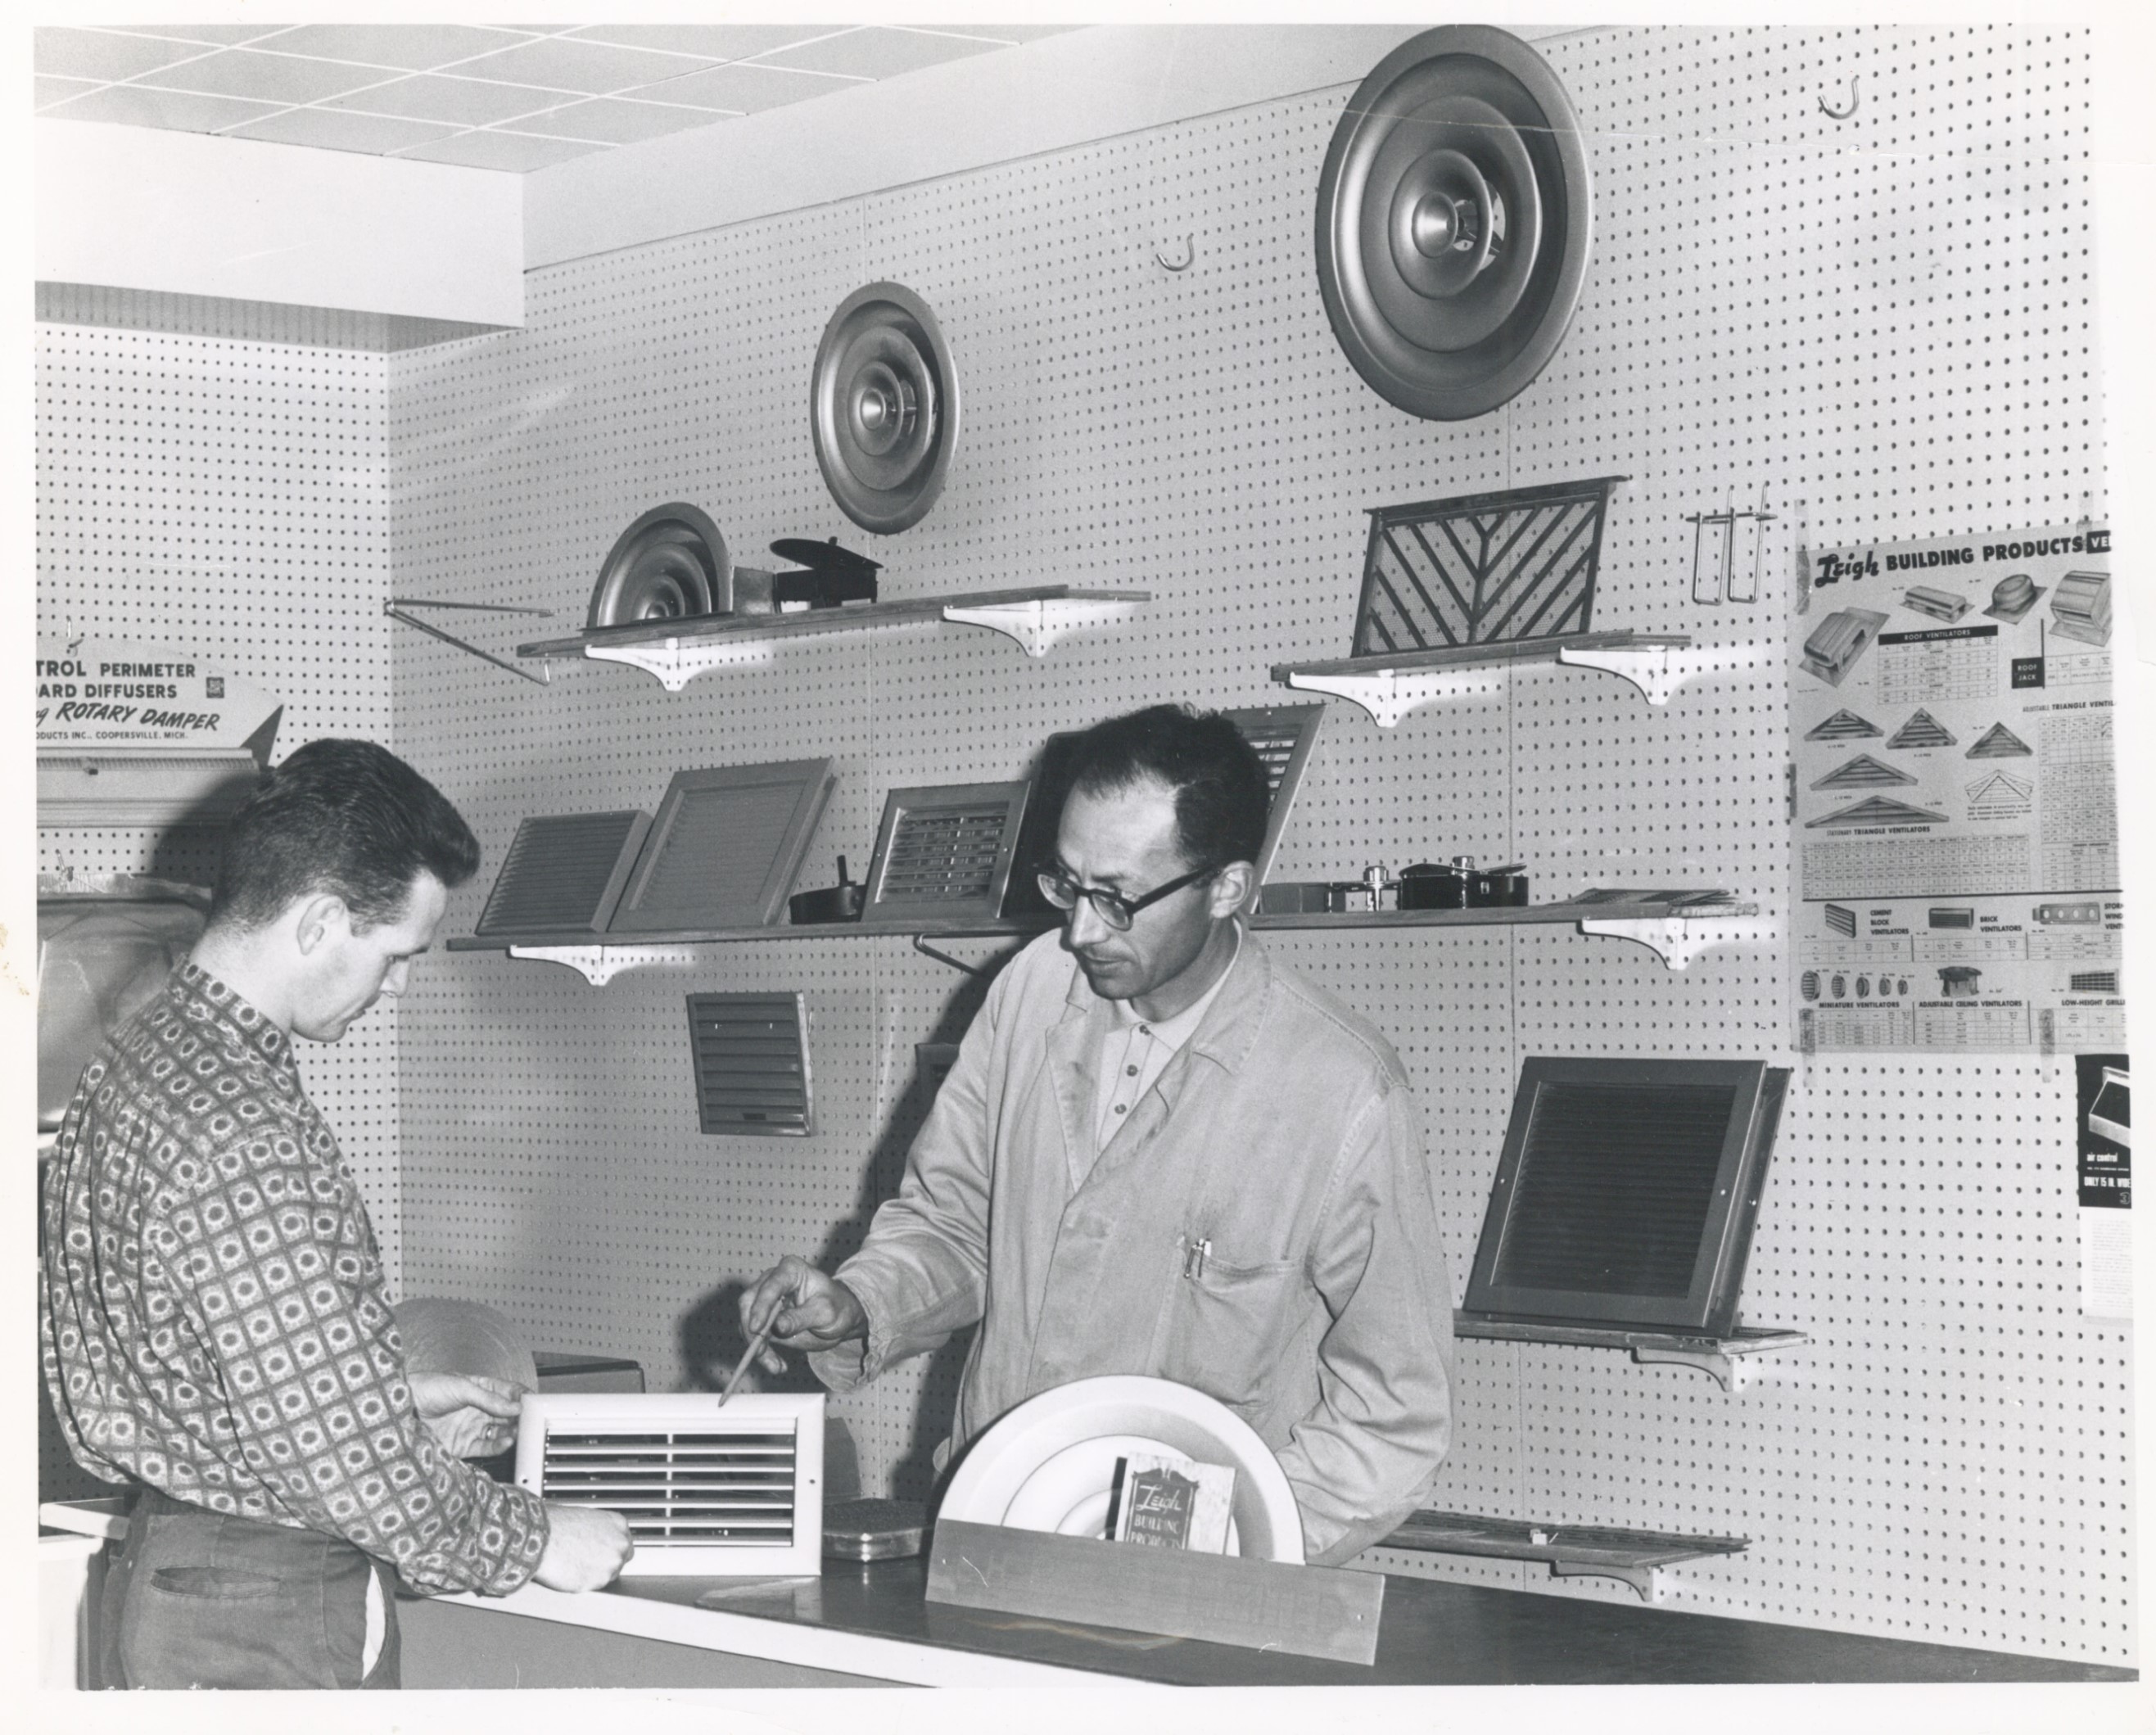 A sales associate showing a grille to a customer at a sales counter